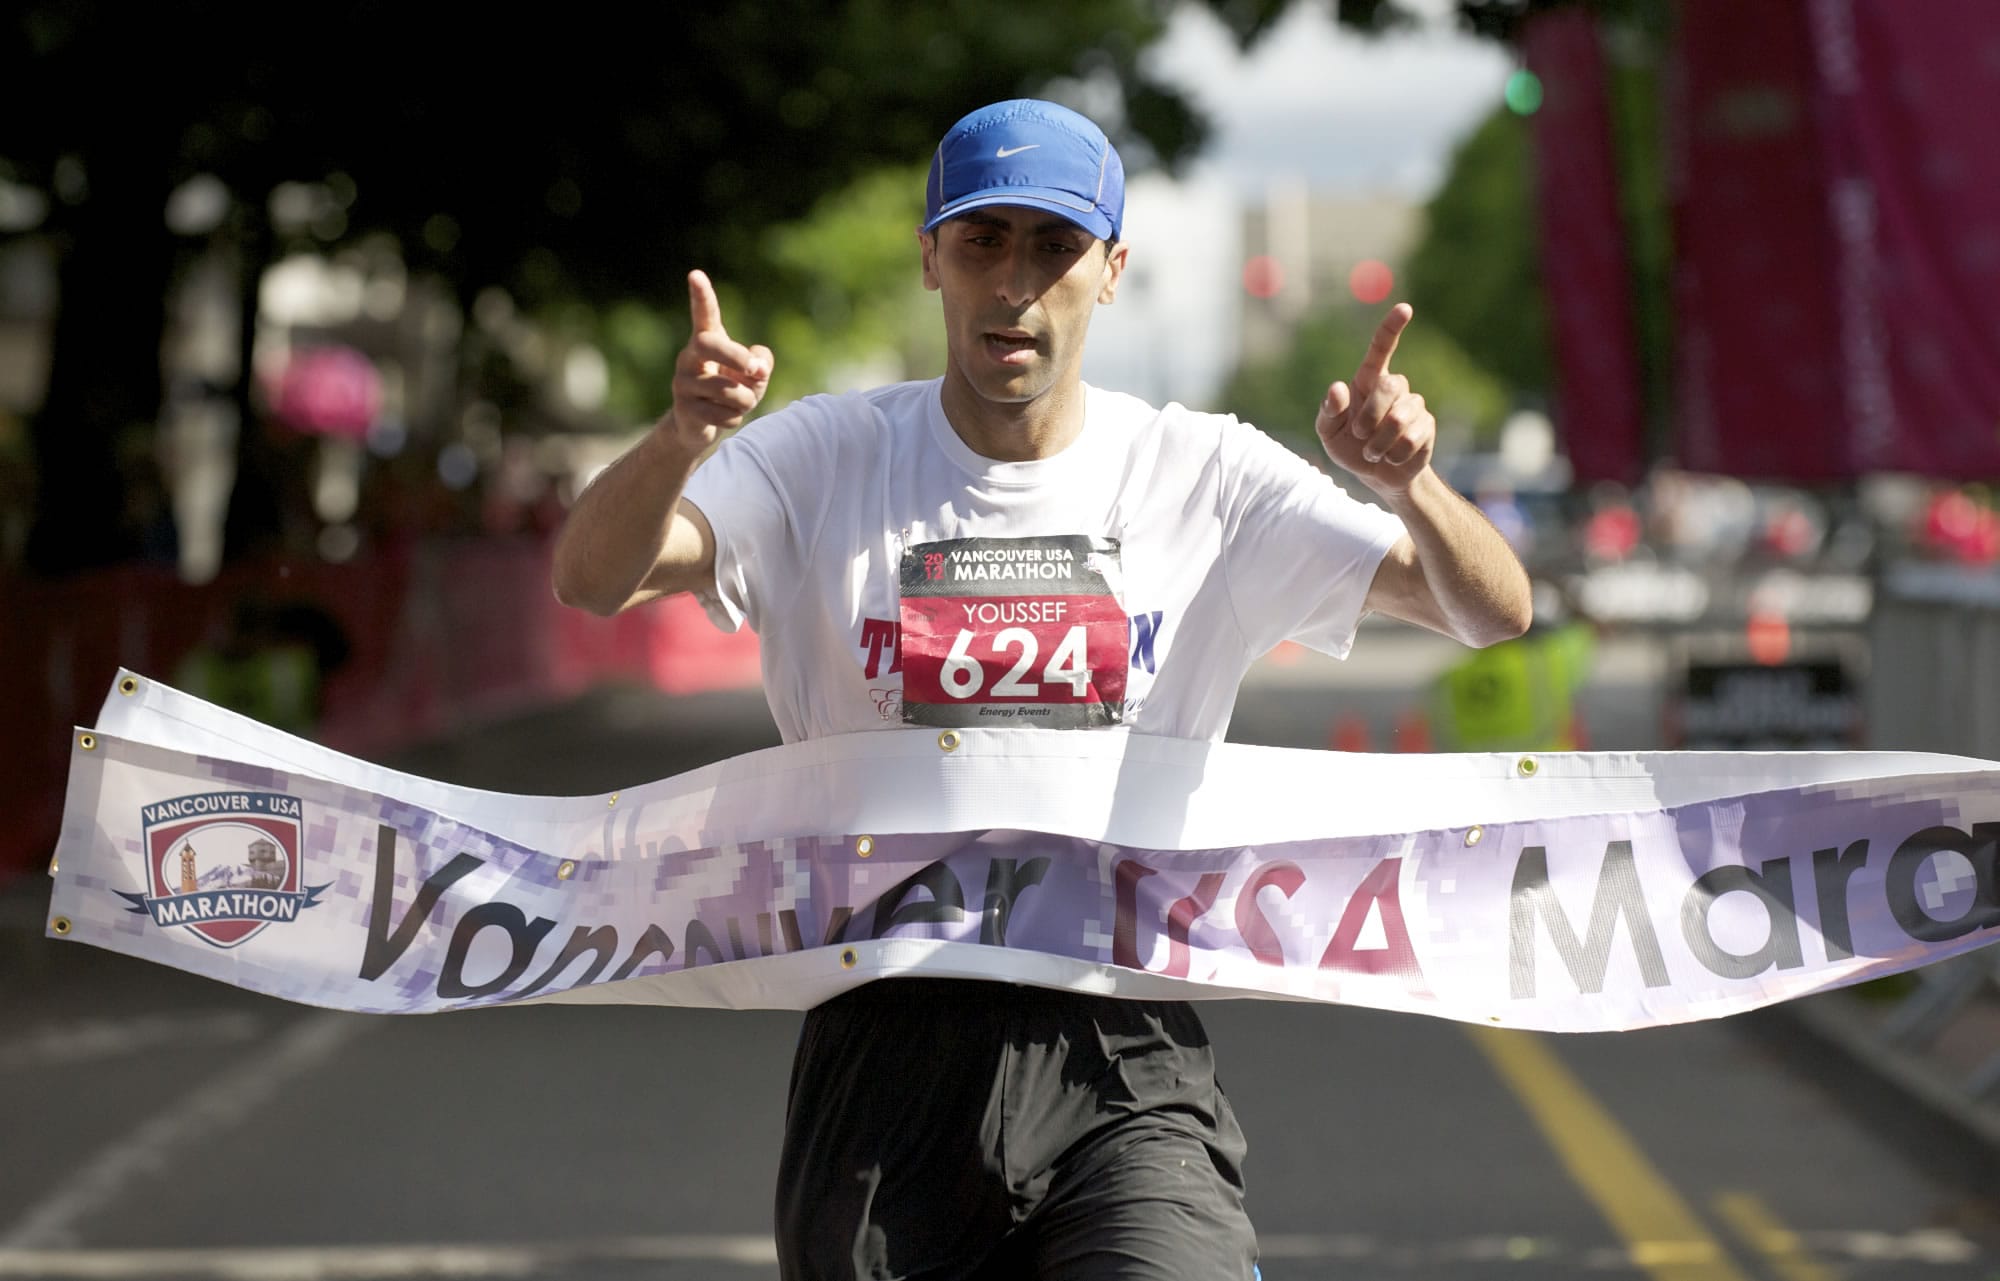 Vancouver resident Youssef Zirari runs away with the Vancouver USA Marathon title in 2 hours, 34 minutes, 25 seconds on Sunday.